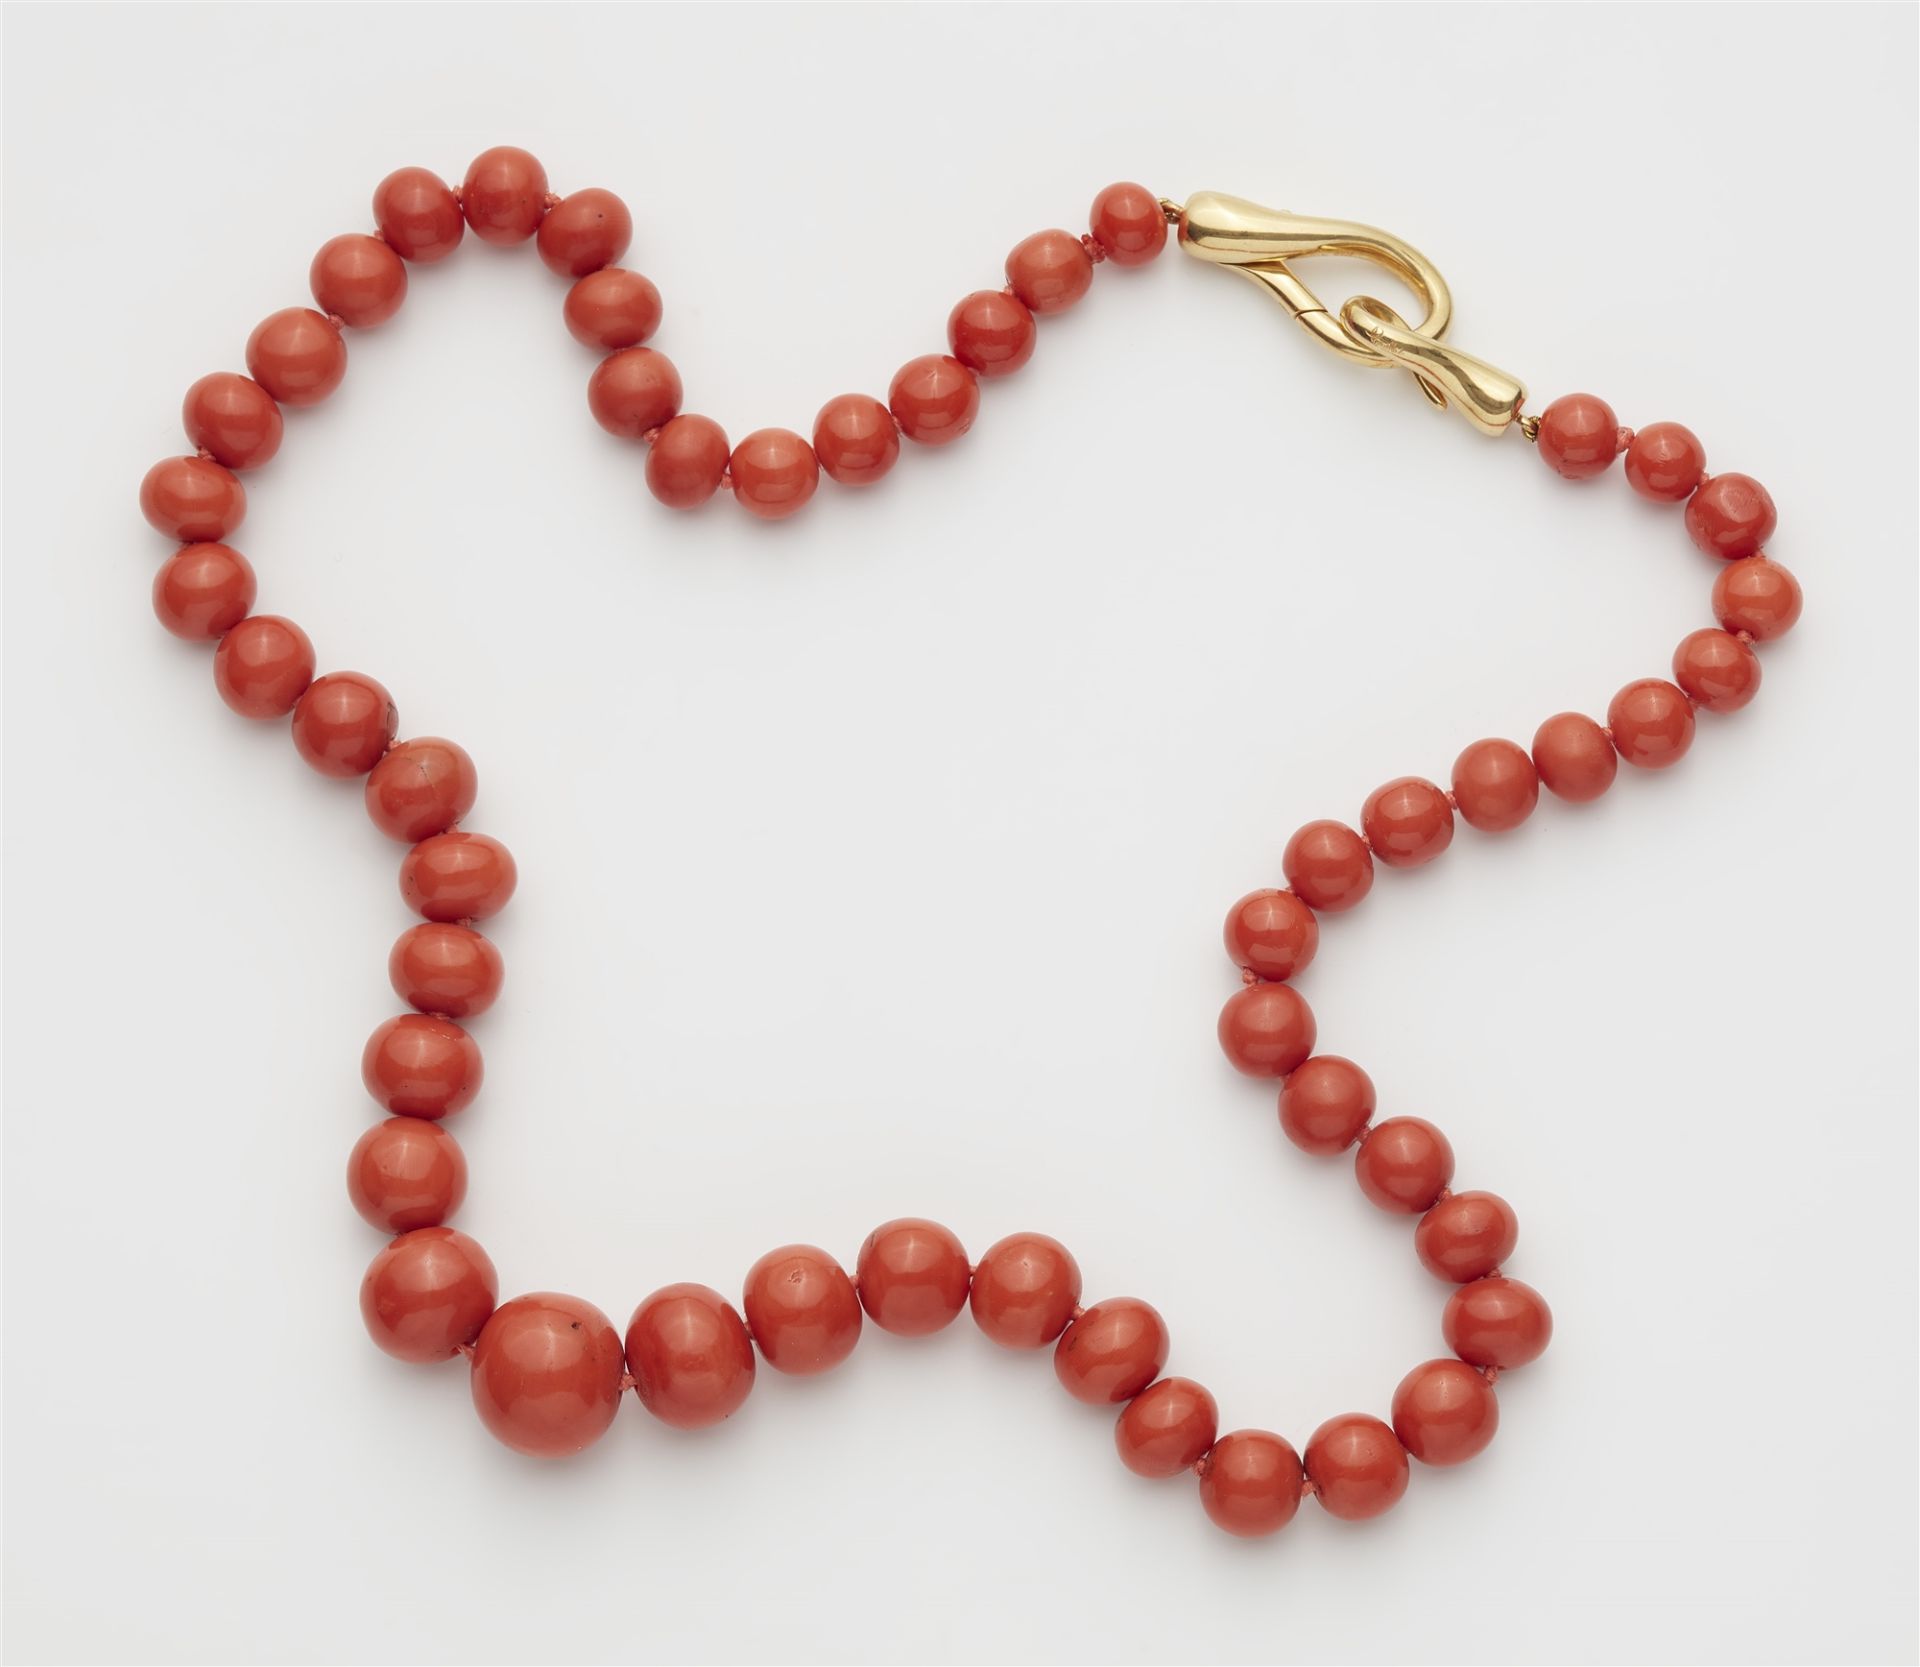 A coral necklace with an 18k gold Pomellato clasp.